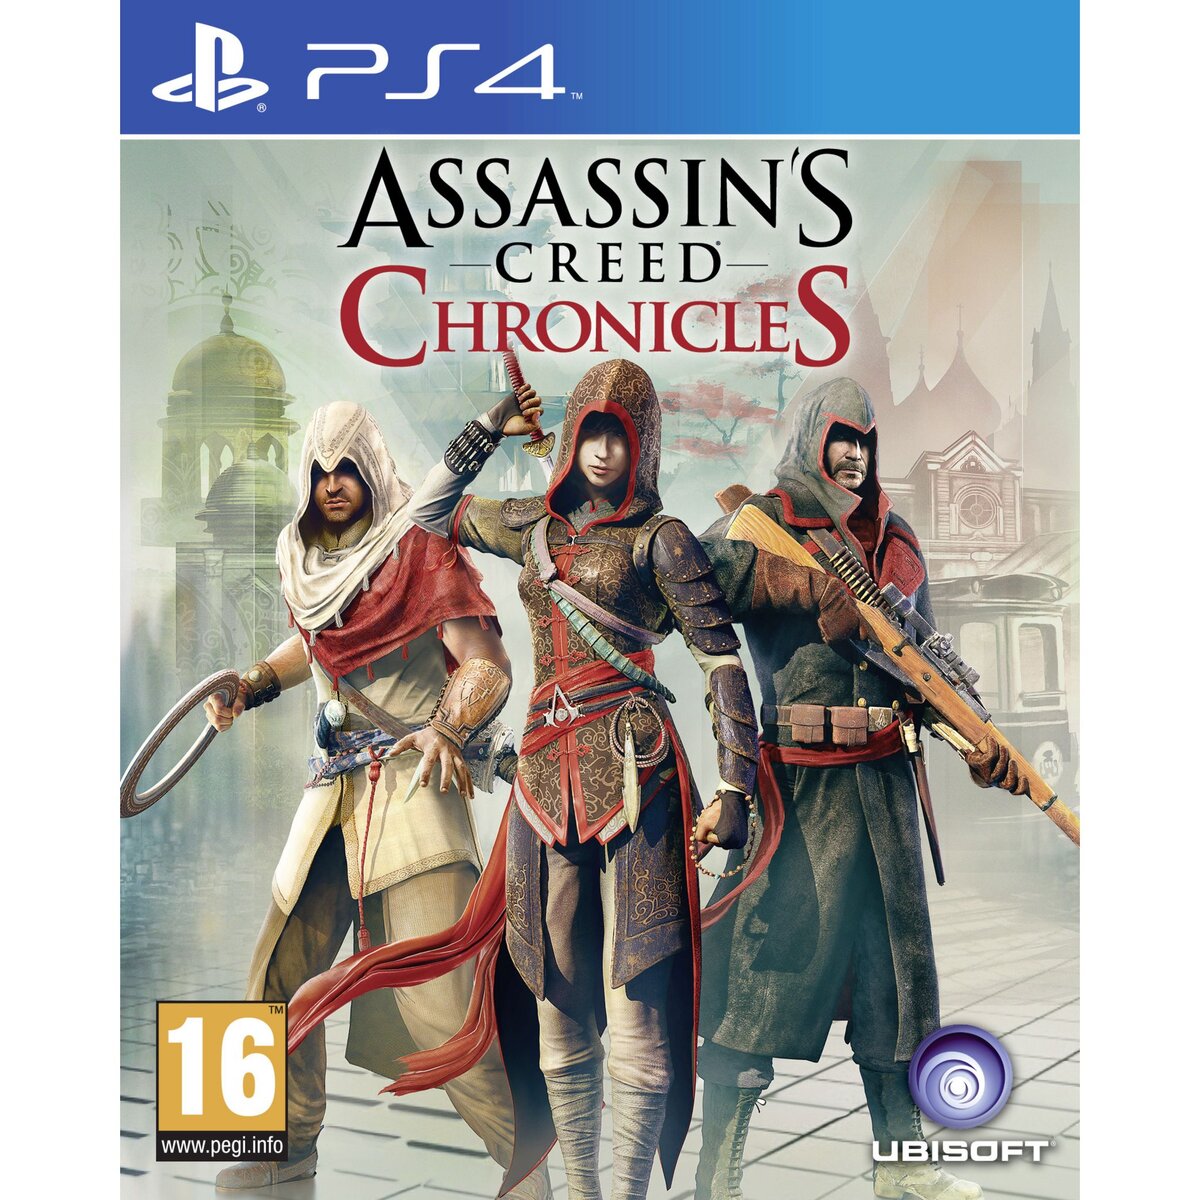 Assassin's Creed Chronicles - PS4